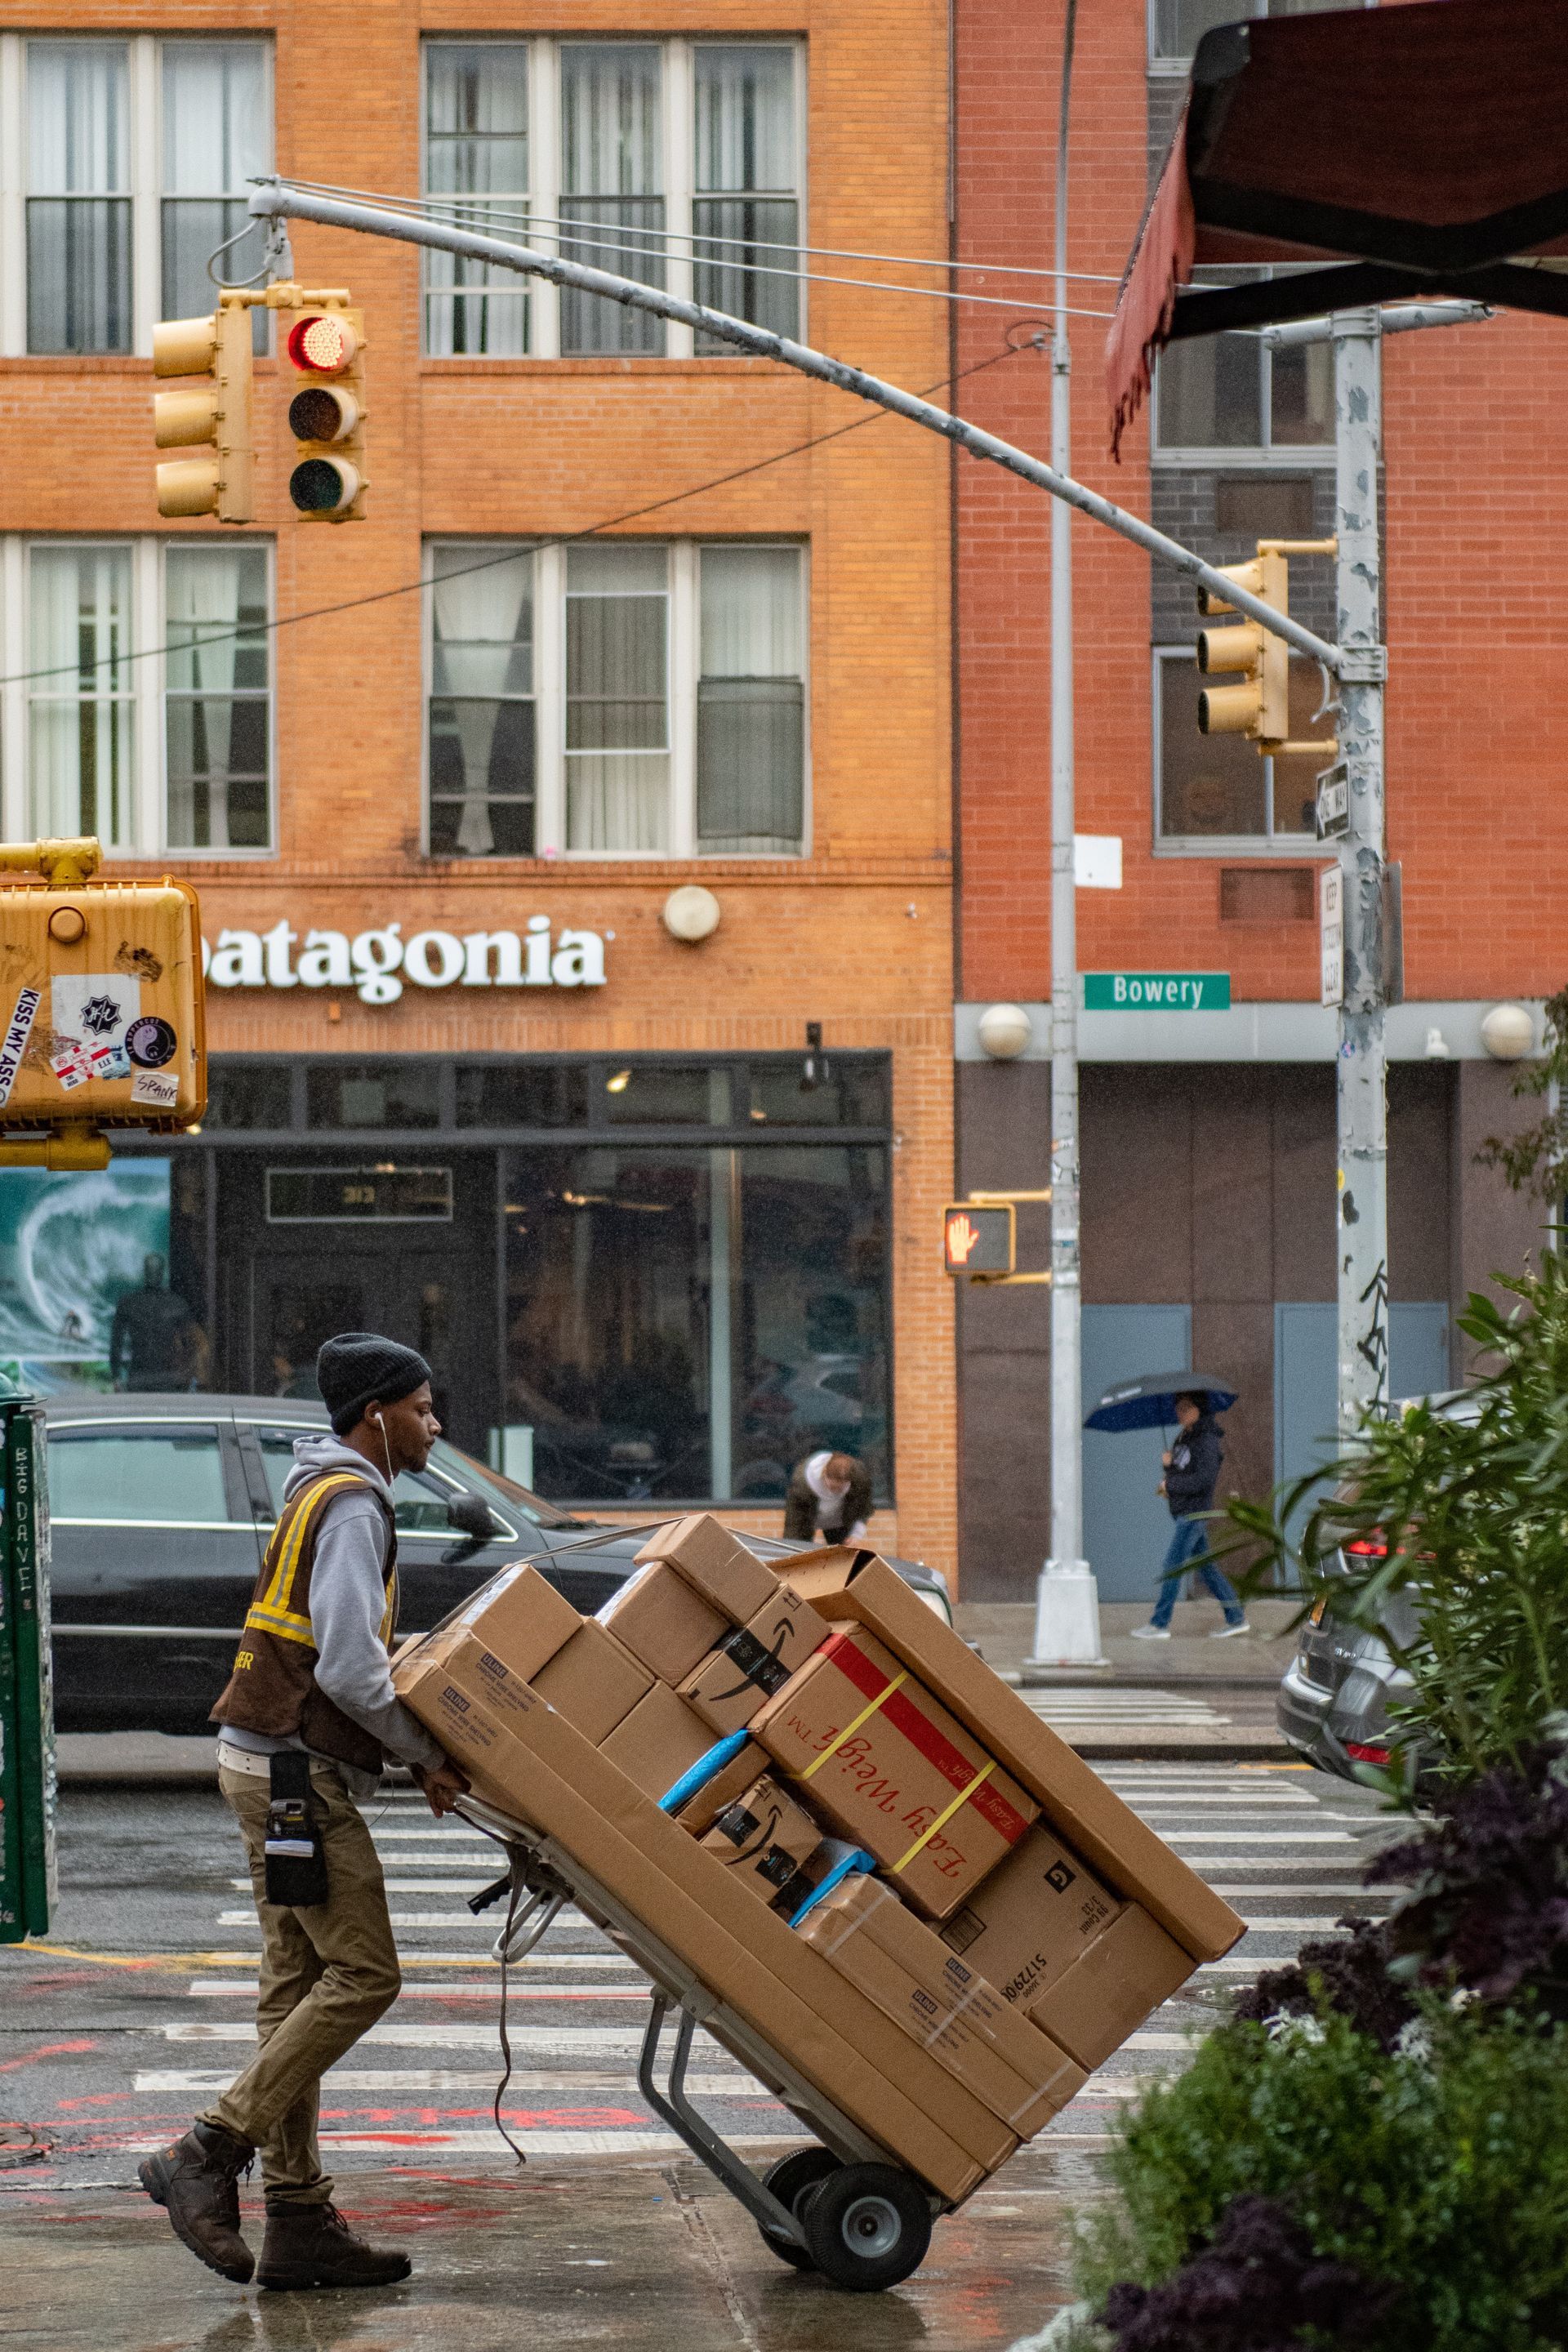 A man is pushing a cart full of boxes on a city street.